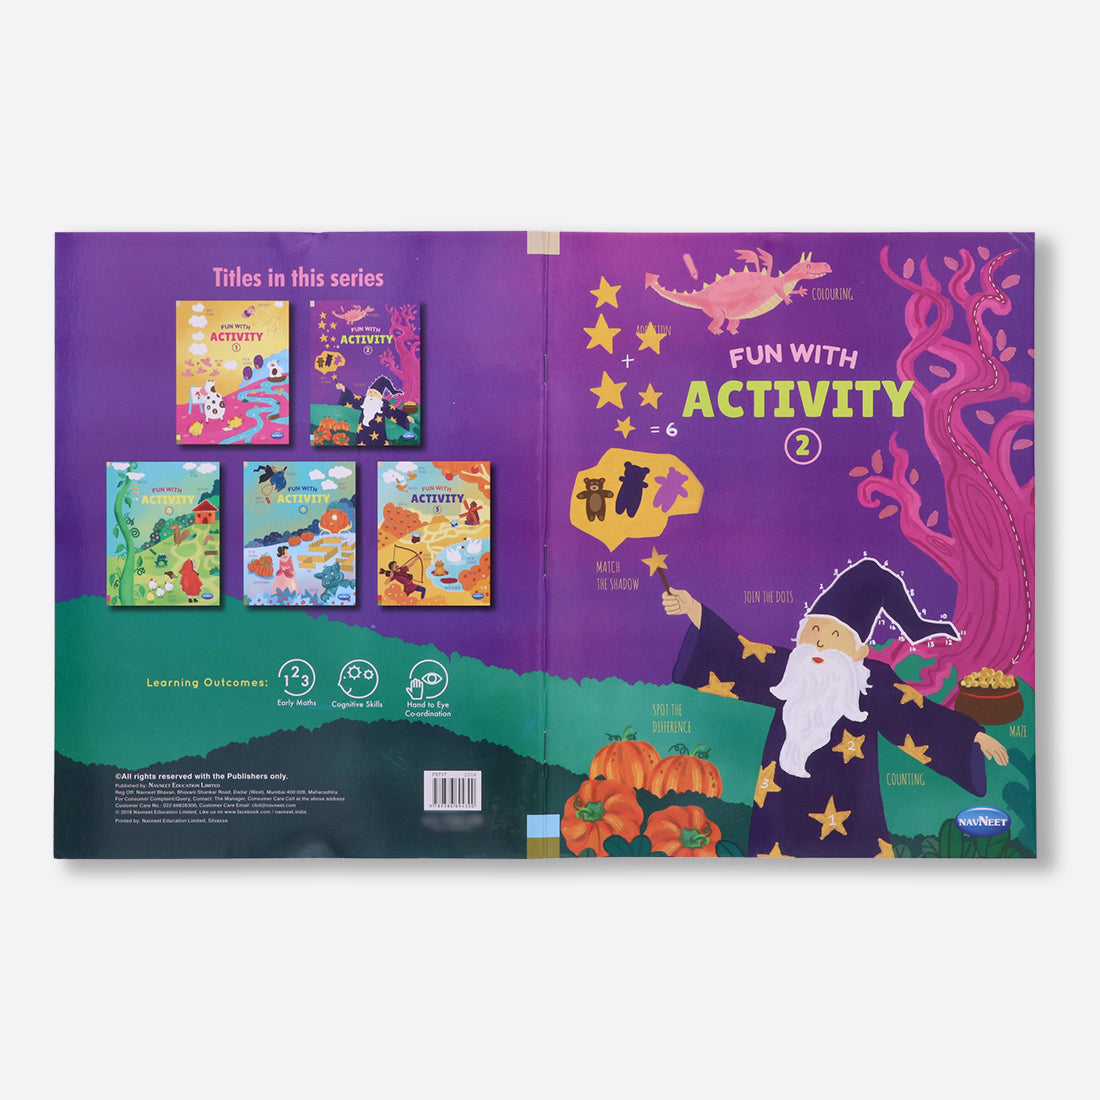 Navneet Fun With Activity Books Set of 5 books for Kindergarten Kids- Develops Essential skills- a collection of activities- Busy Vacation Activity Books - Brain booster books